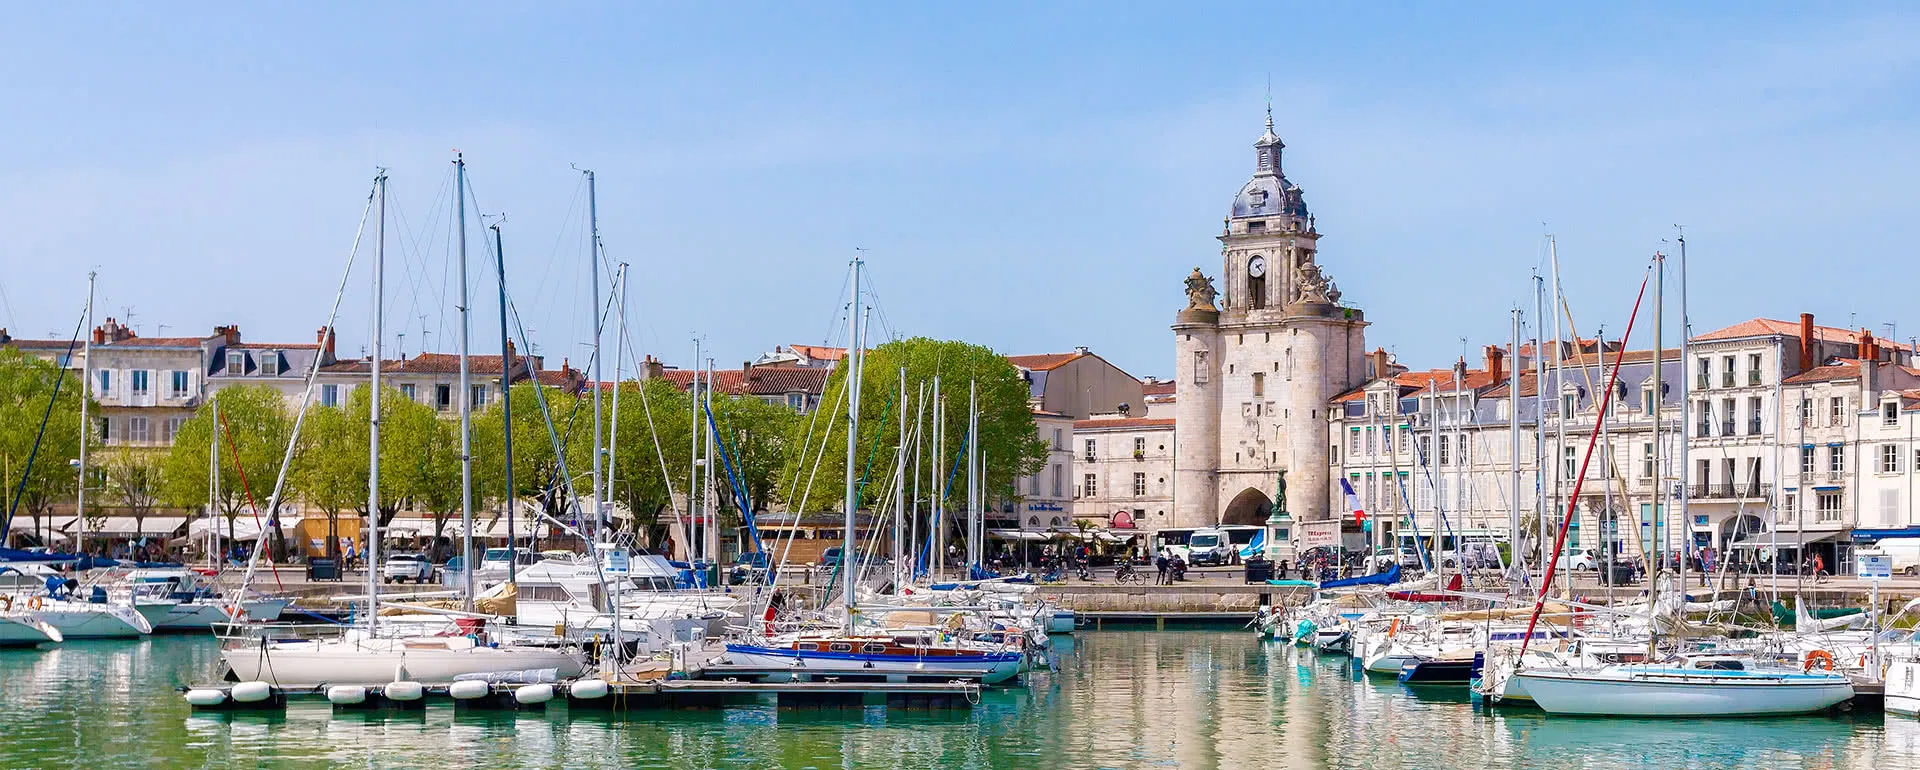 Meeting and conference location La Rochelle